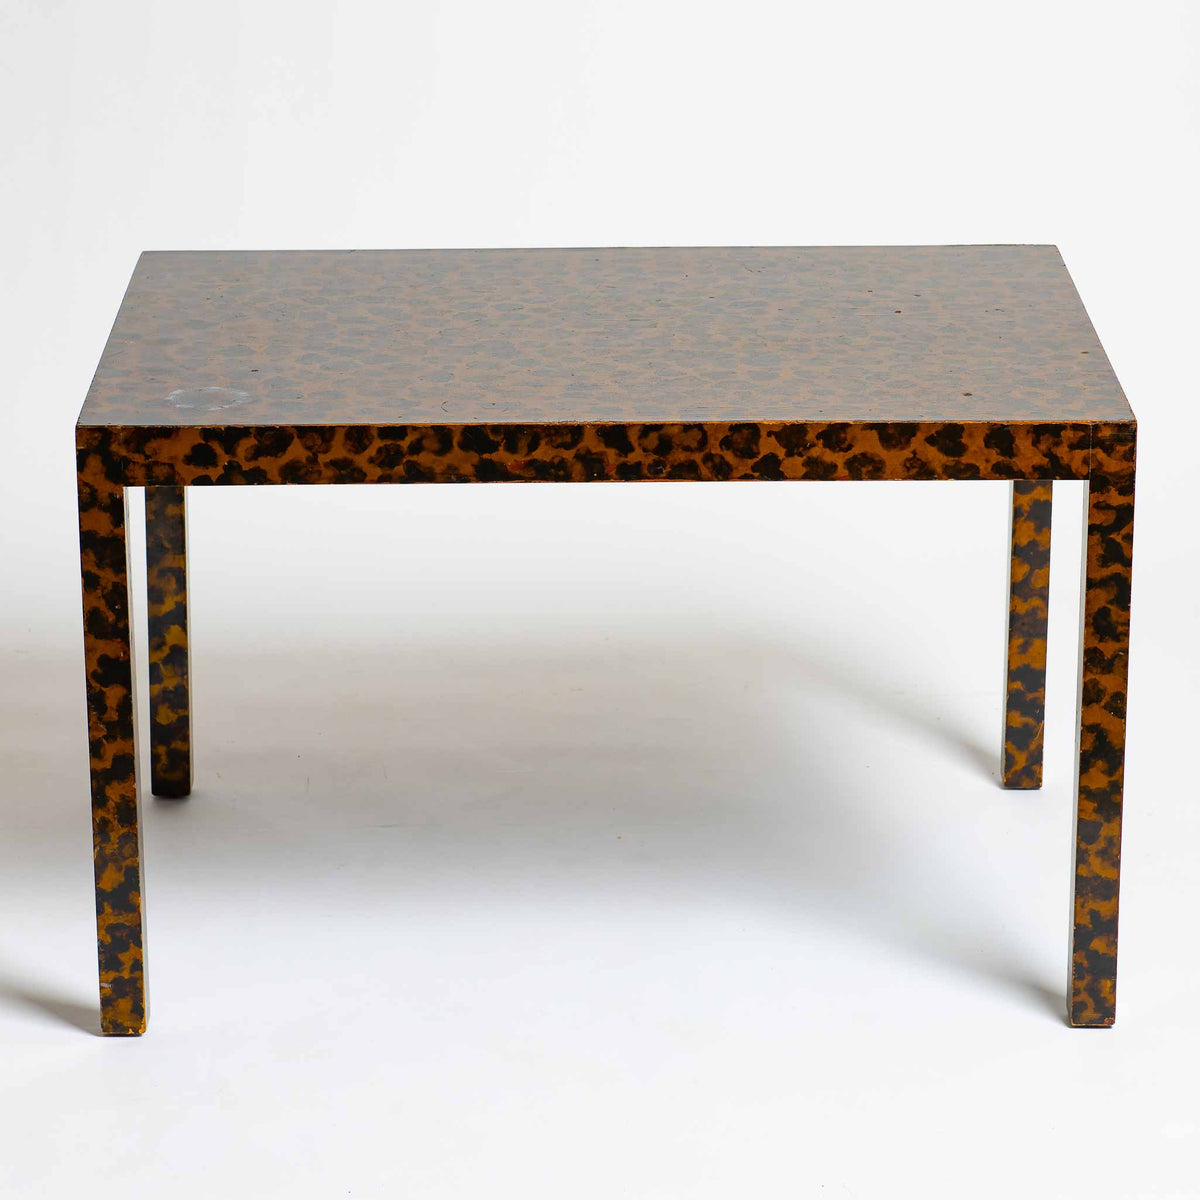 Leopard coffee table S1 F6